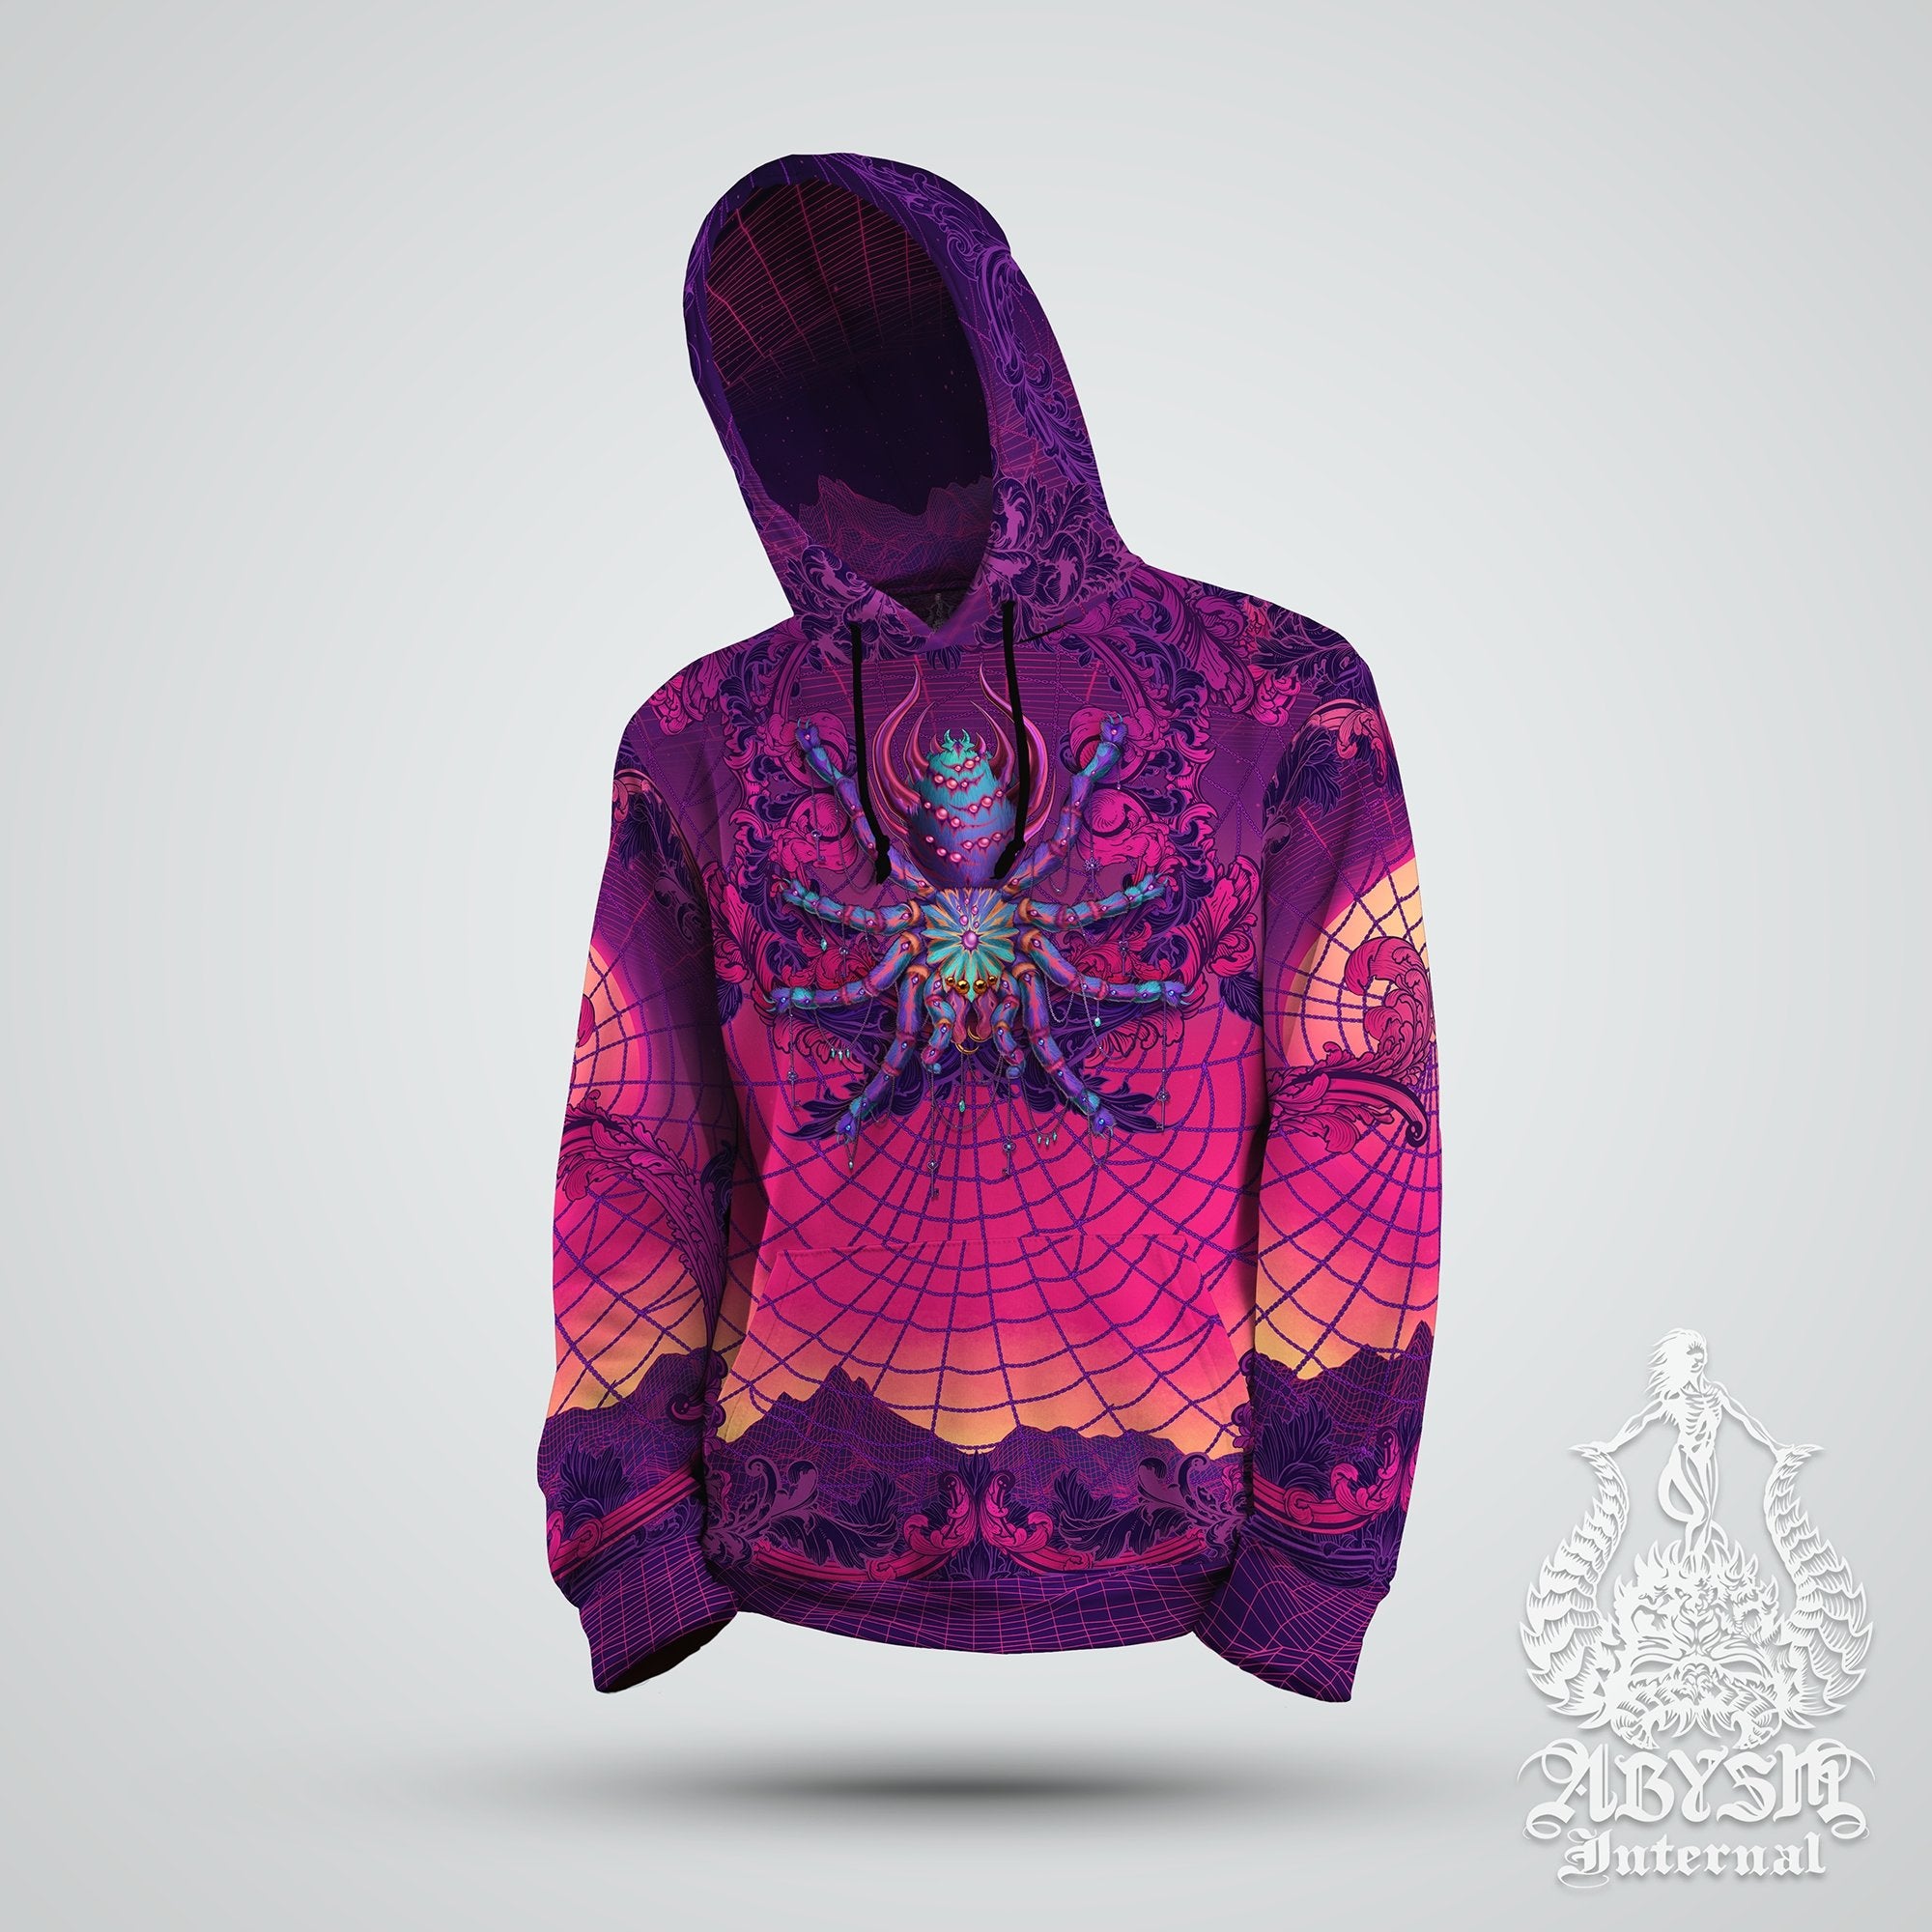 Vaporwave Hoodie, Retrowave Outfit, Trippy Streetwear, Synthwave Festival, 80s Psychedelic Alternative Clothing, Unisex - Spider - Abysm Internal